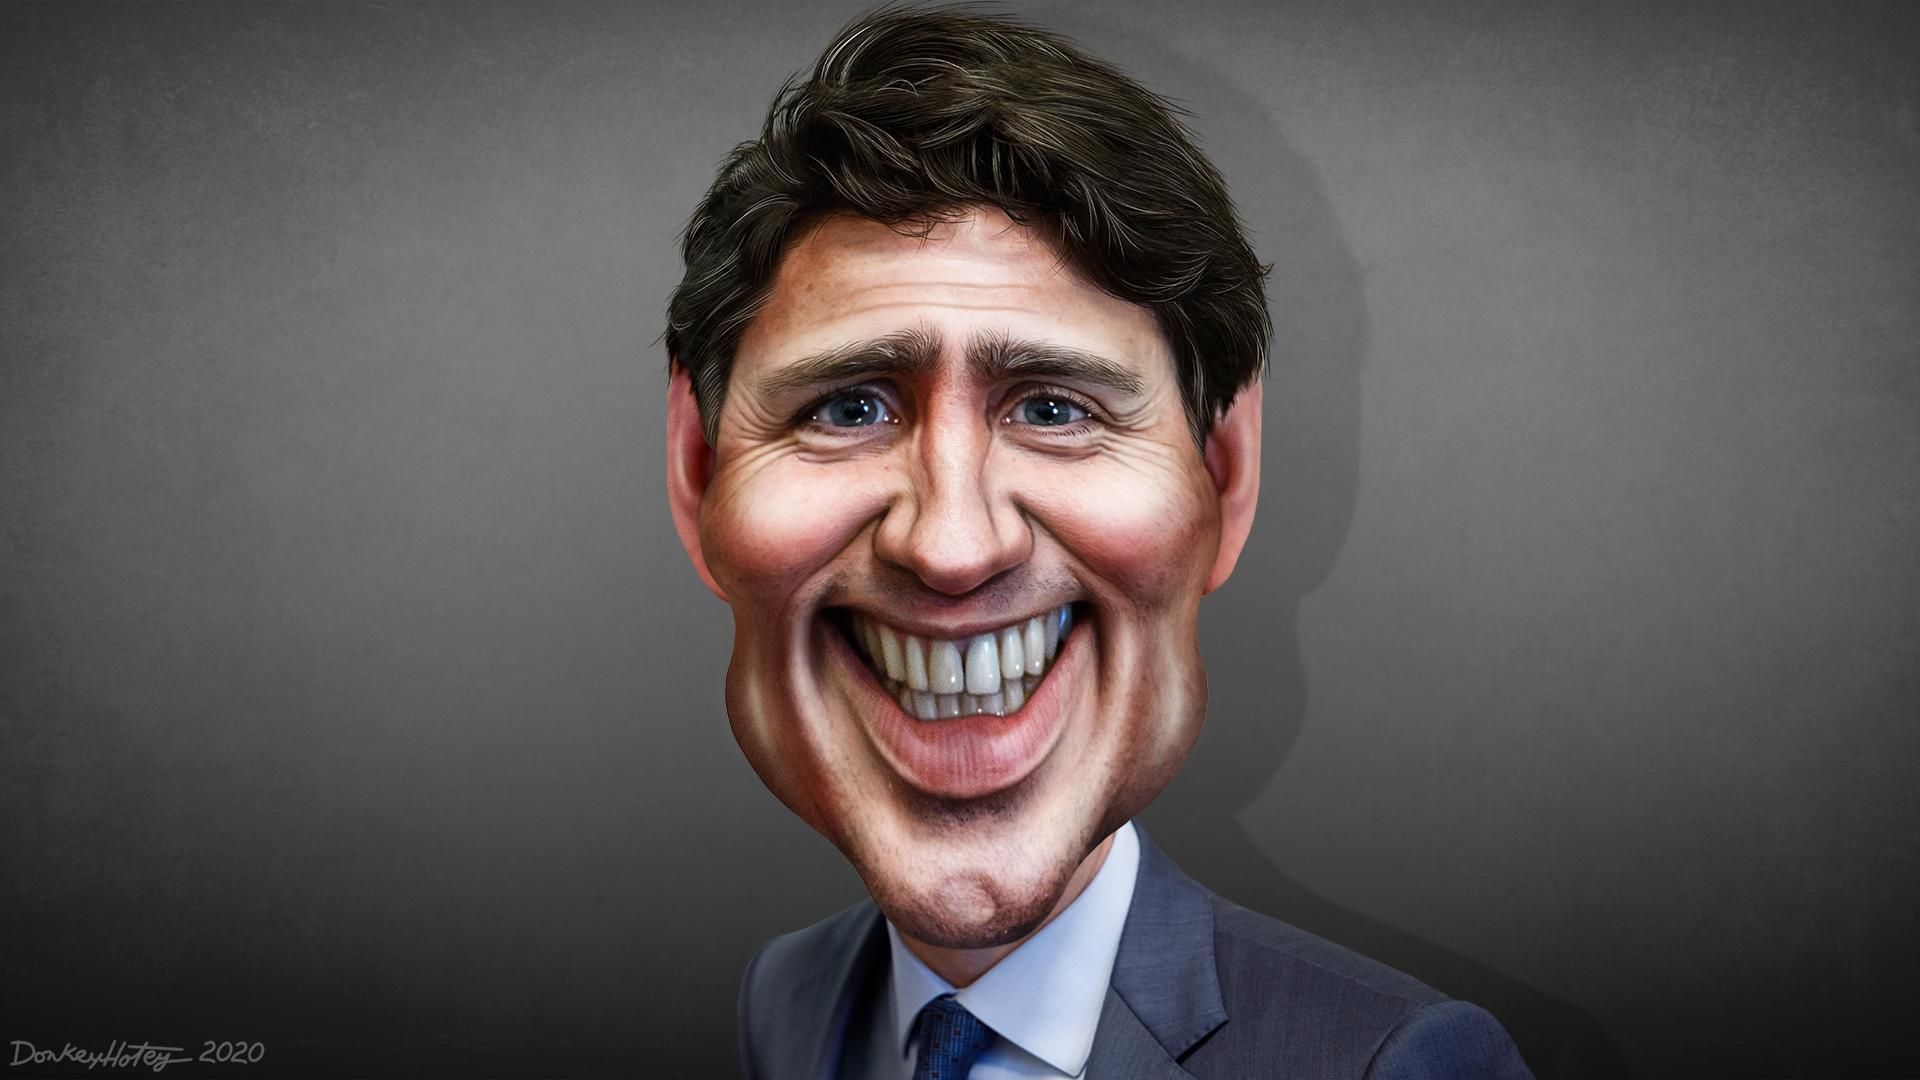 Justin Trudeau, is the prime minister of Canada and the leader of the Liberal Party.